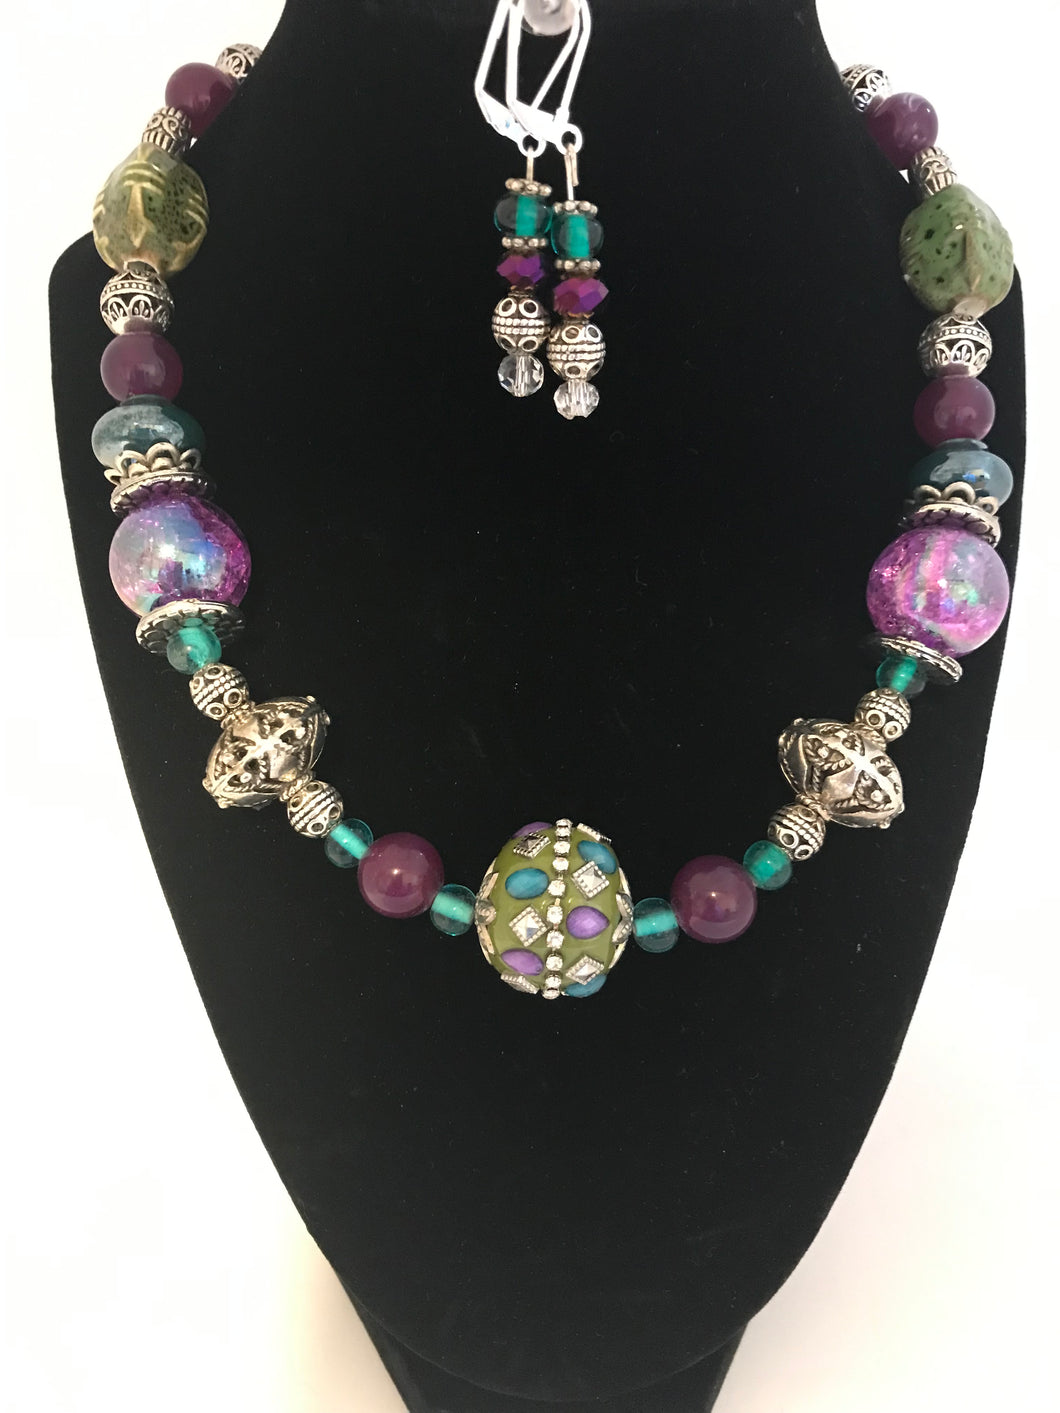 Multi-color glass and stone beaded necklace with matching earrings